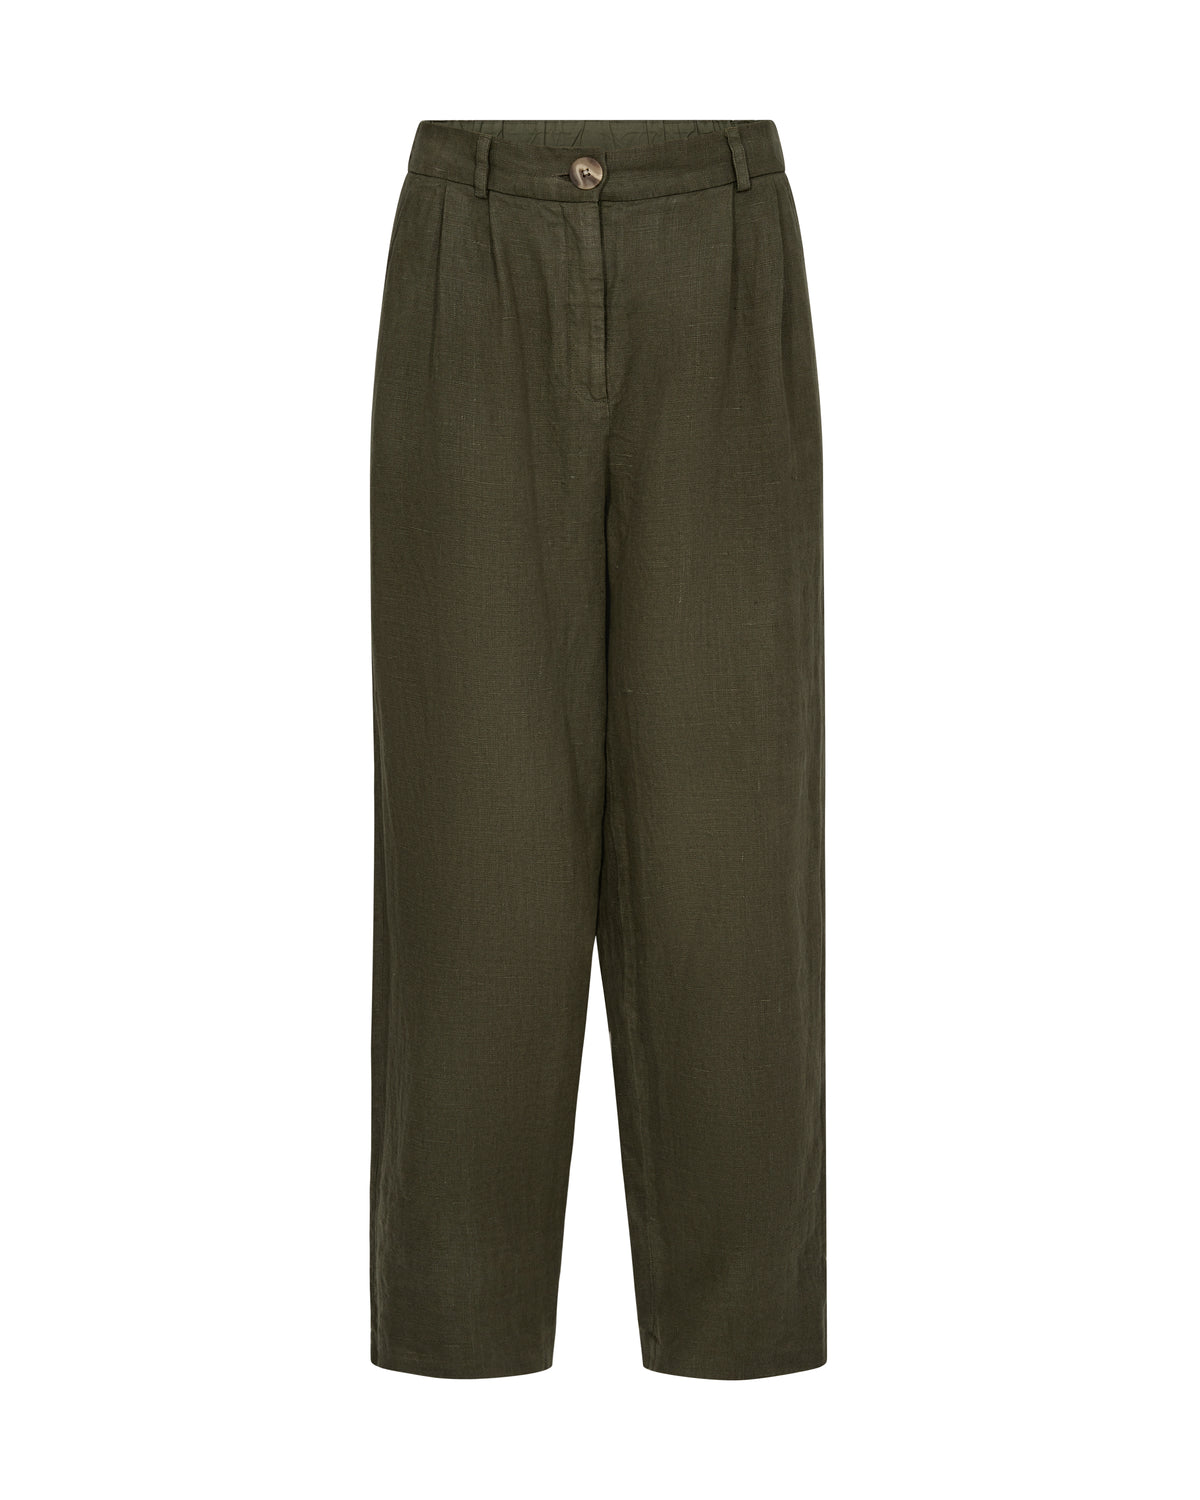 Regular cut khaki linen trousers with zip and button fastening pleated front and side pockets